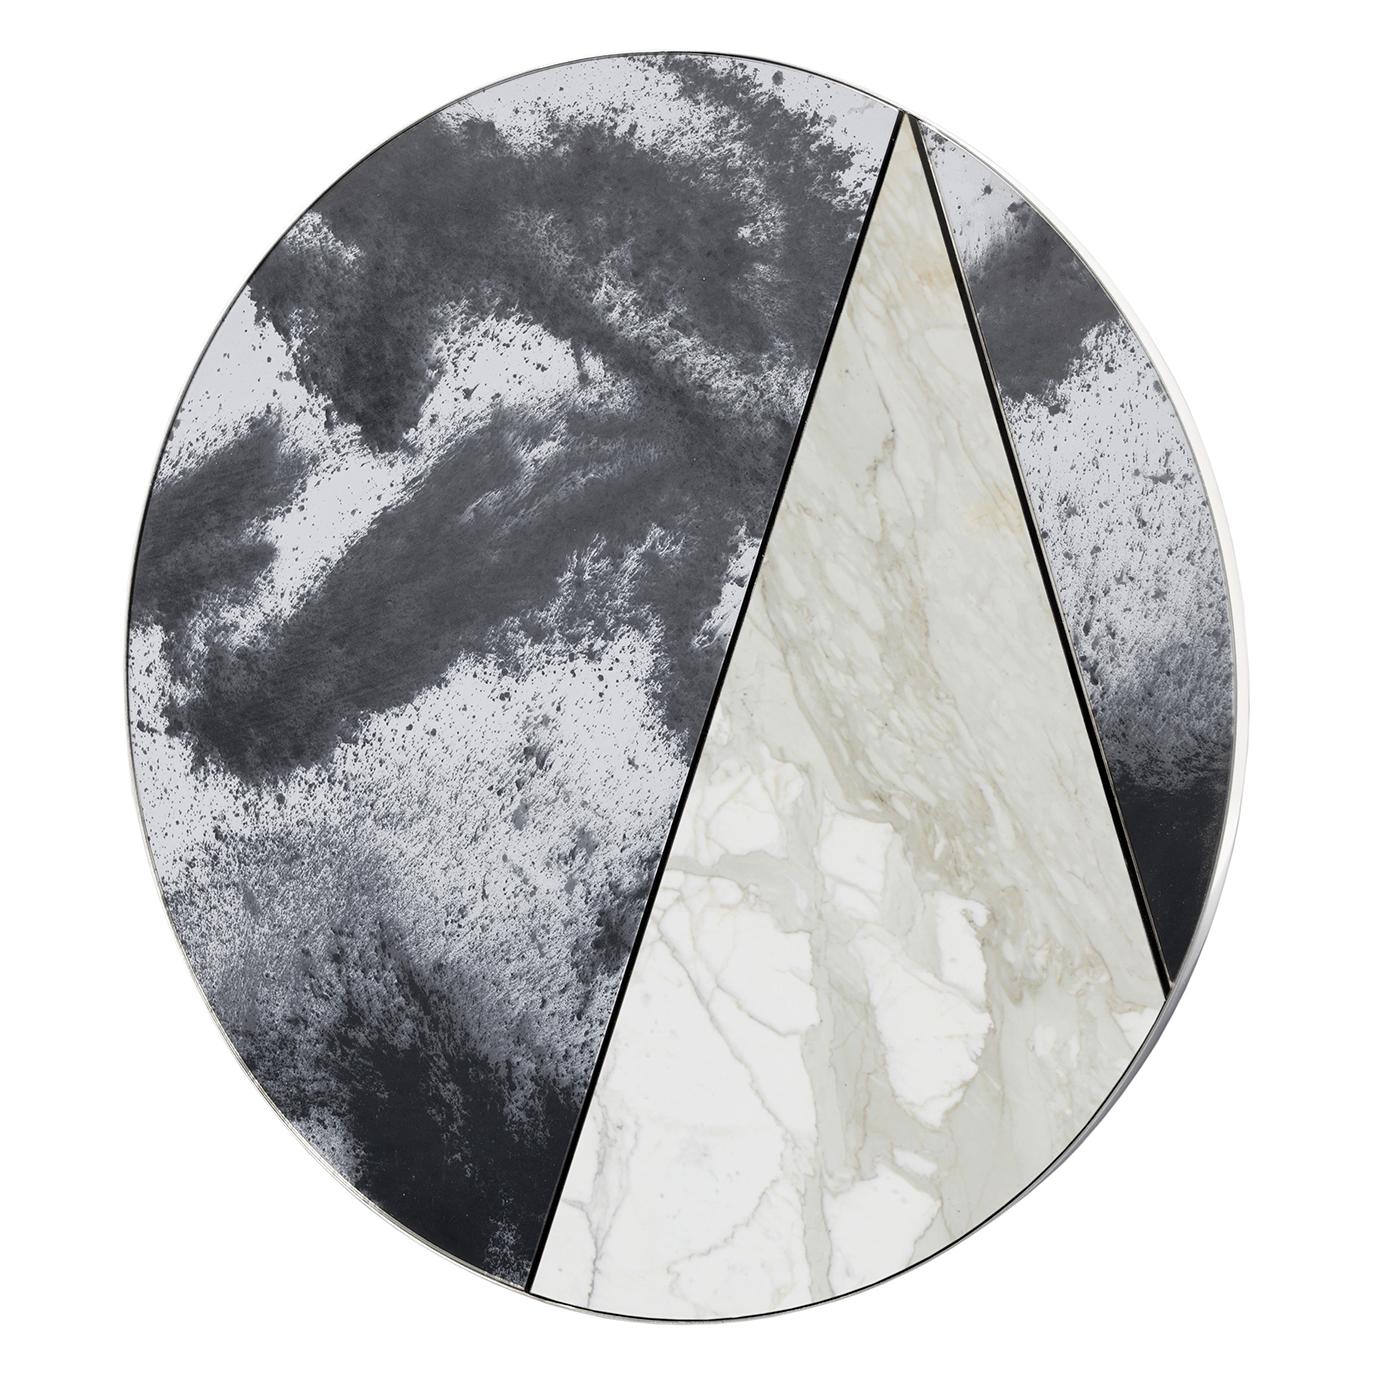 Shards of antique glass frame a slice of Calacatta marble in the Itinera Res Lunare III mirror. A unique decorative piece with a harmonious design, the mirror is the perfect way to top a console or sideboard in a modern space. As the mirror is made